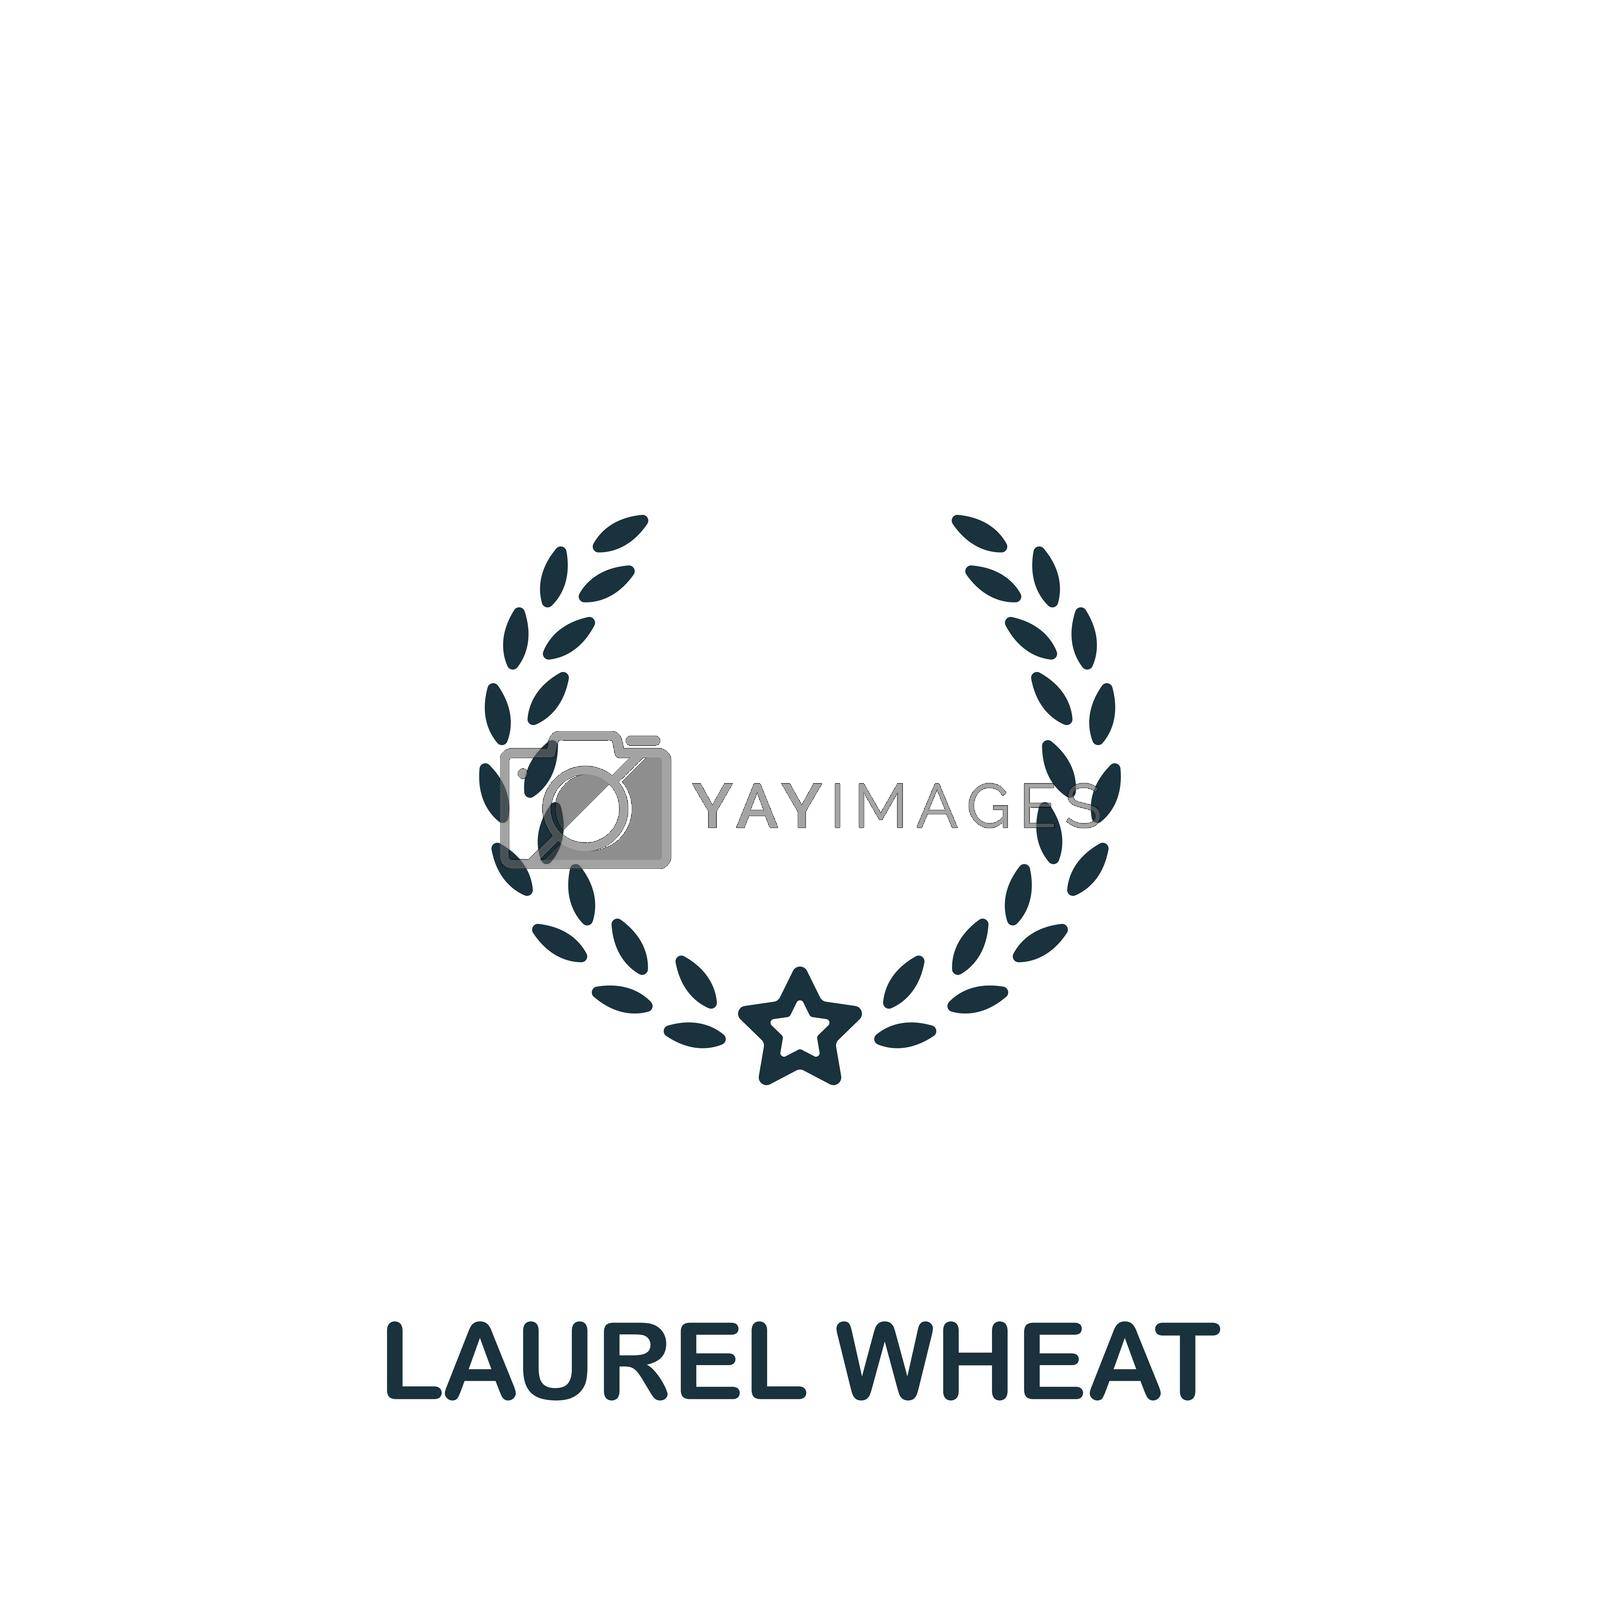 Royalty free image of Laurel Wheat icon. Monochrome simple Success icon for templates, web design and infographics by simakovavector